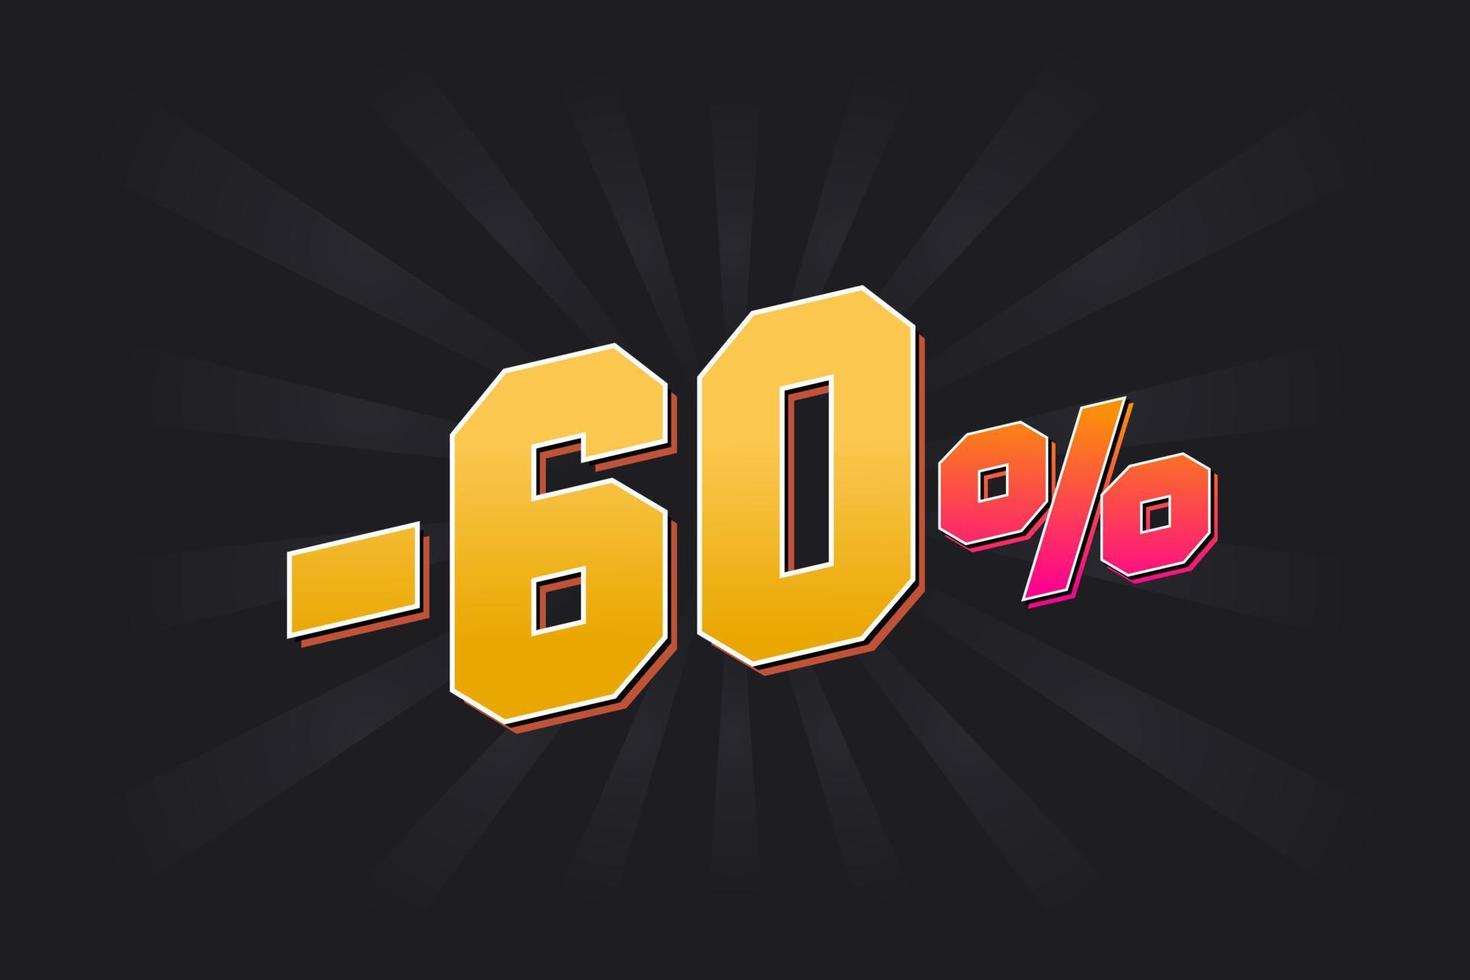 Negative 60 discount banner with dark background and yellow text. -60 percent sales promotional design. vector